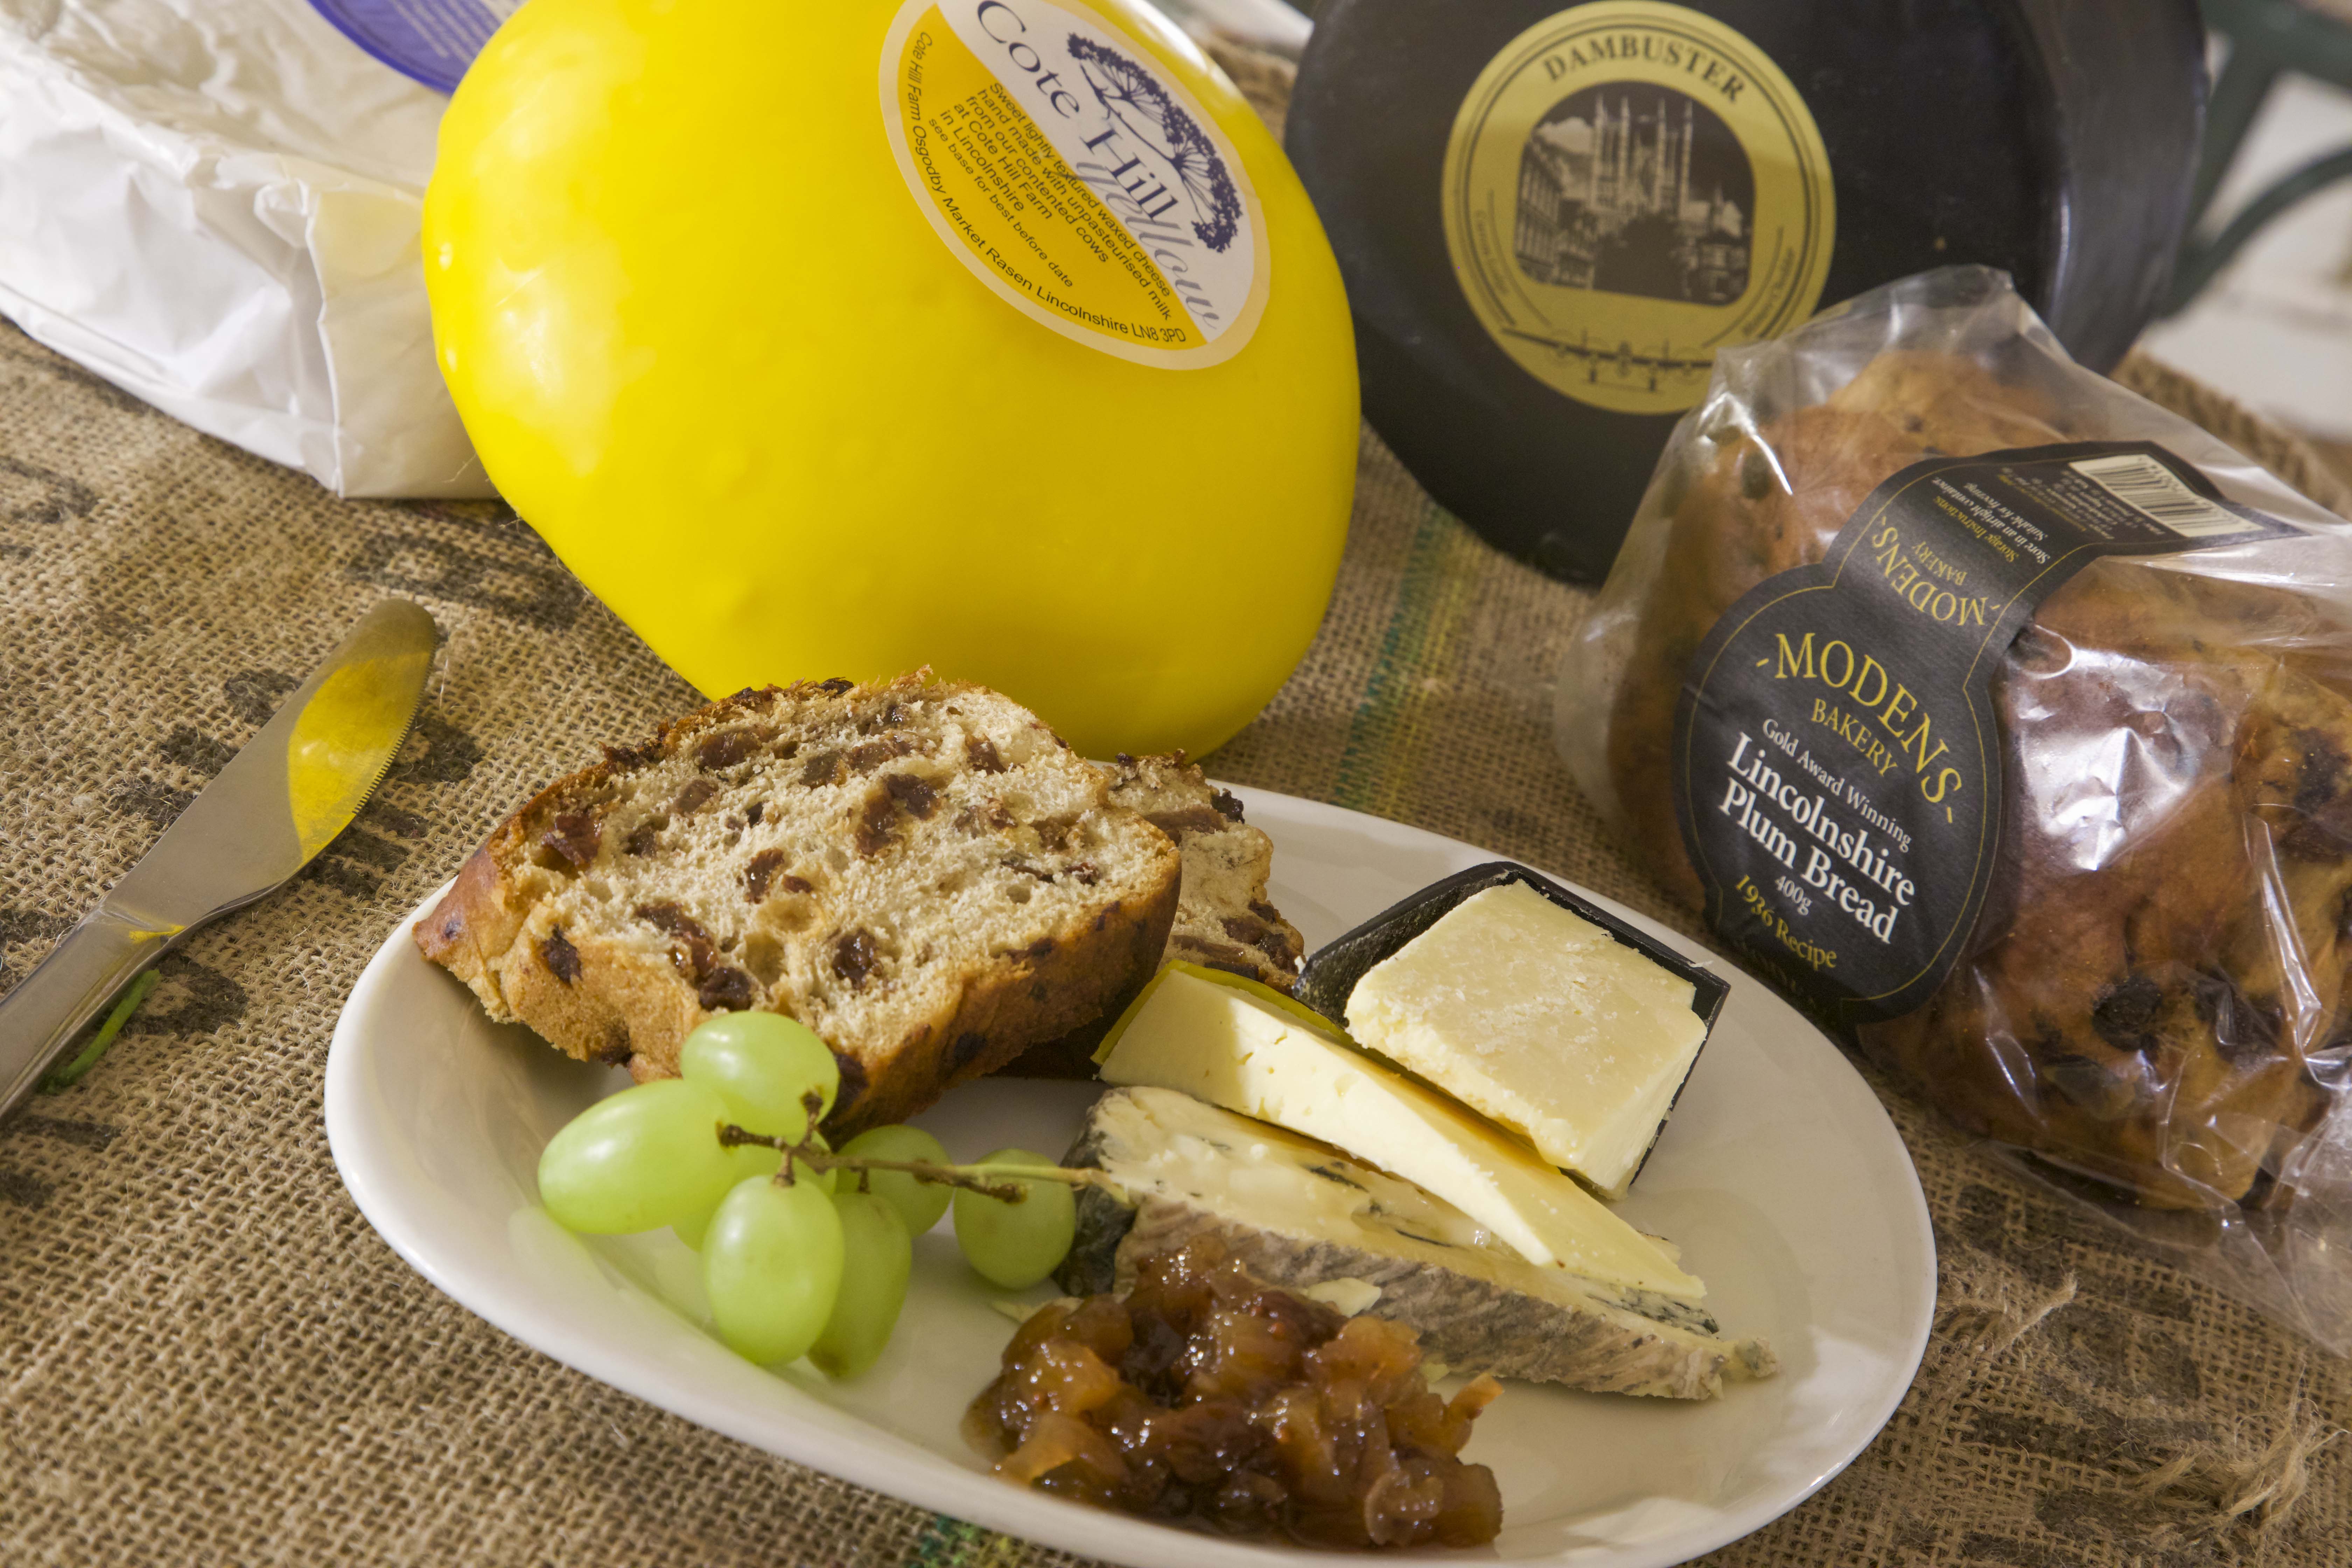 Local cheese board with Modens plum loaf, image Rob Davis, Lincolnshire Pride.